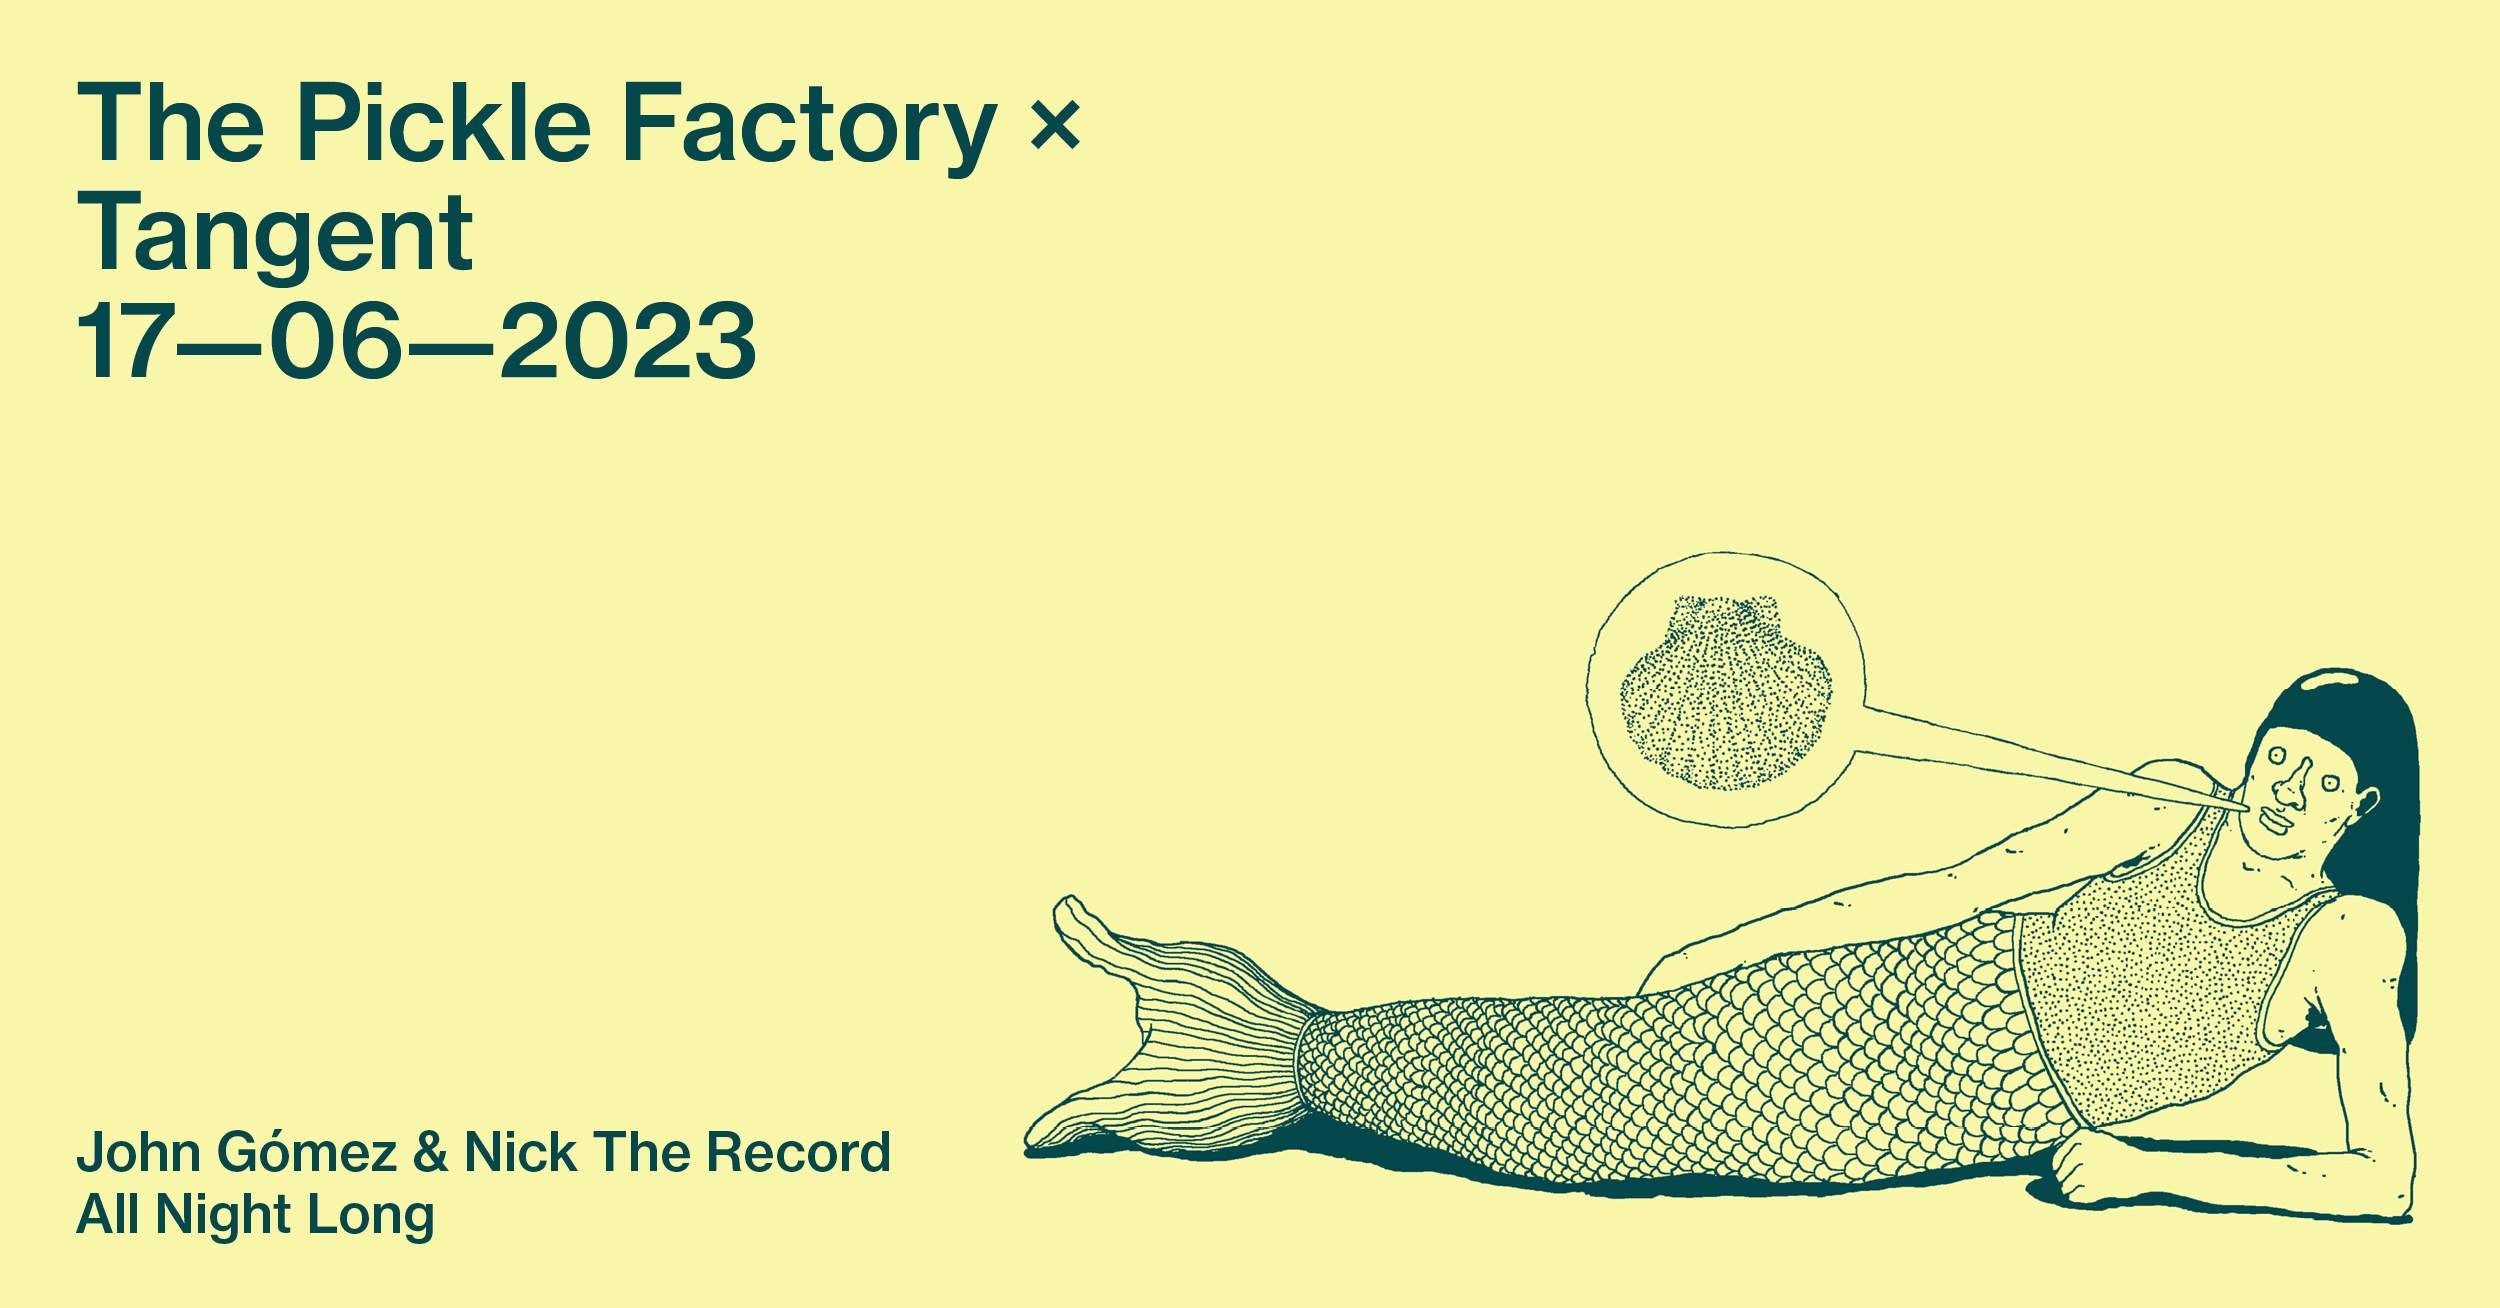 The Pickle Factory x Tangent with John Gómez & Nick The Record All Night Long - フライヤー表